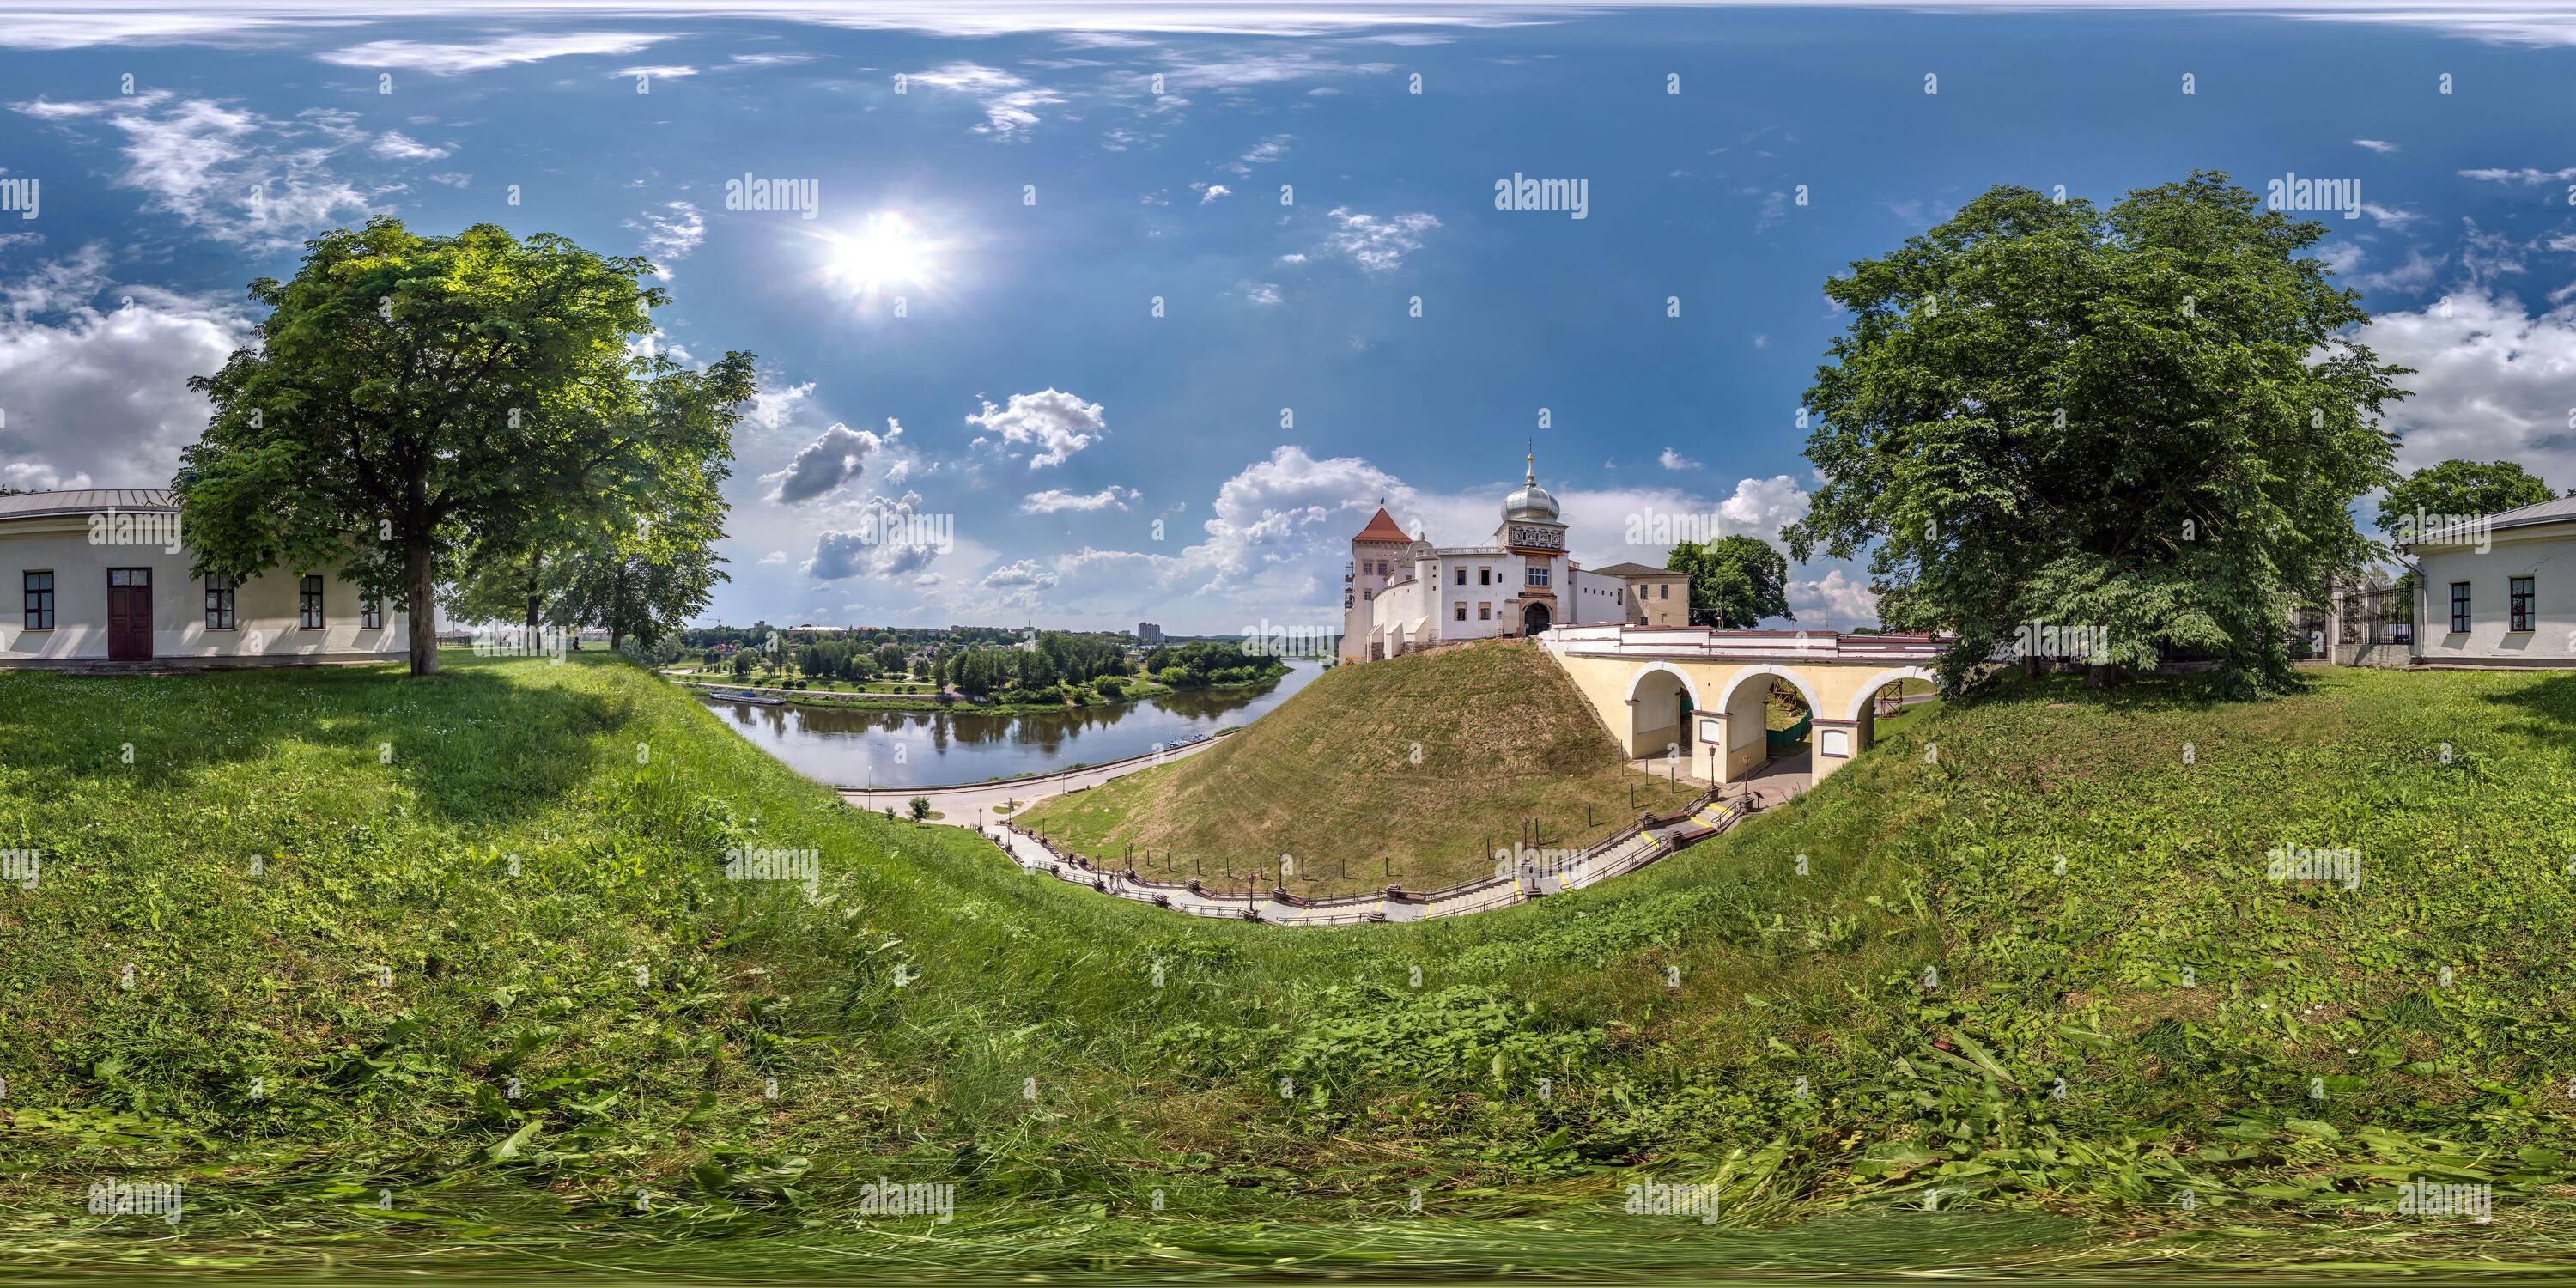 360 degree panoramic view of full seamless spherical hdri panorama 360 promenade overlooking the old city and historic buildings of medieval castle near wide river on mountain in